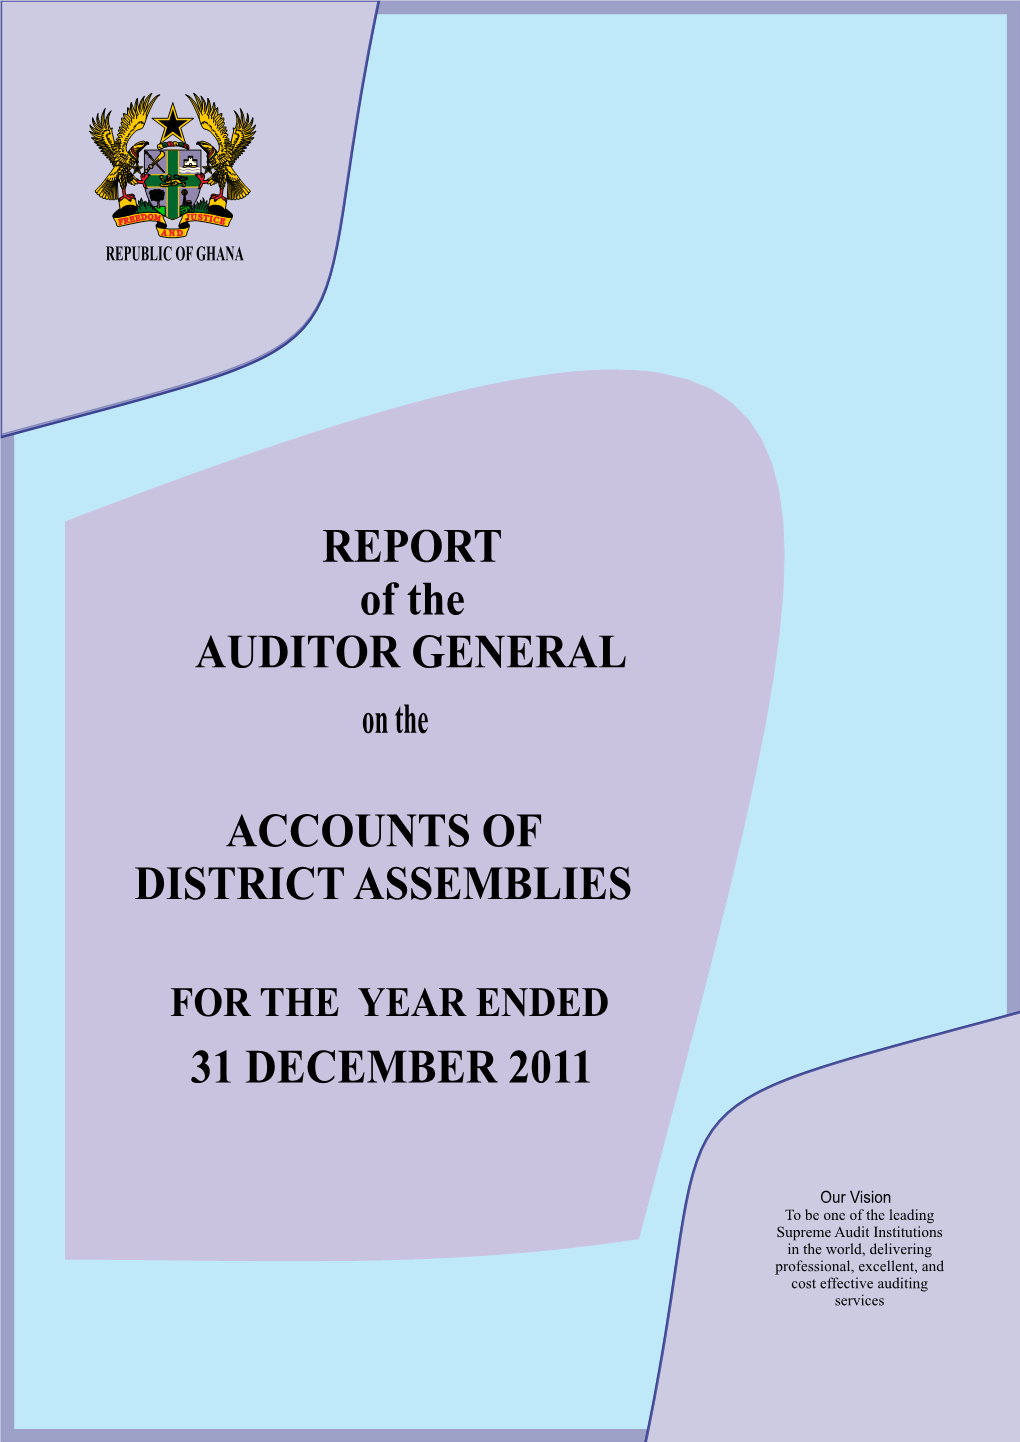 REPORT of the AUDITOR GENERAL ACCOUNTS of DISTRICT ASSEMBLIES 31 DECEMBER 2011